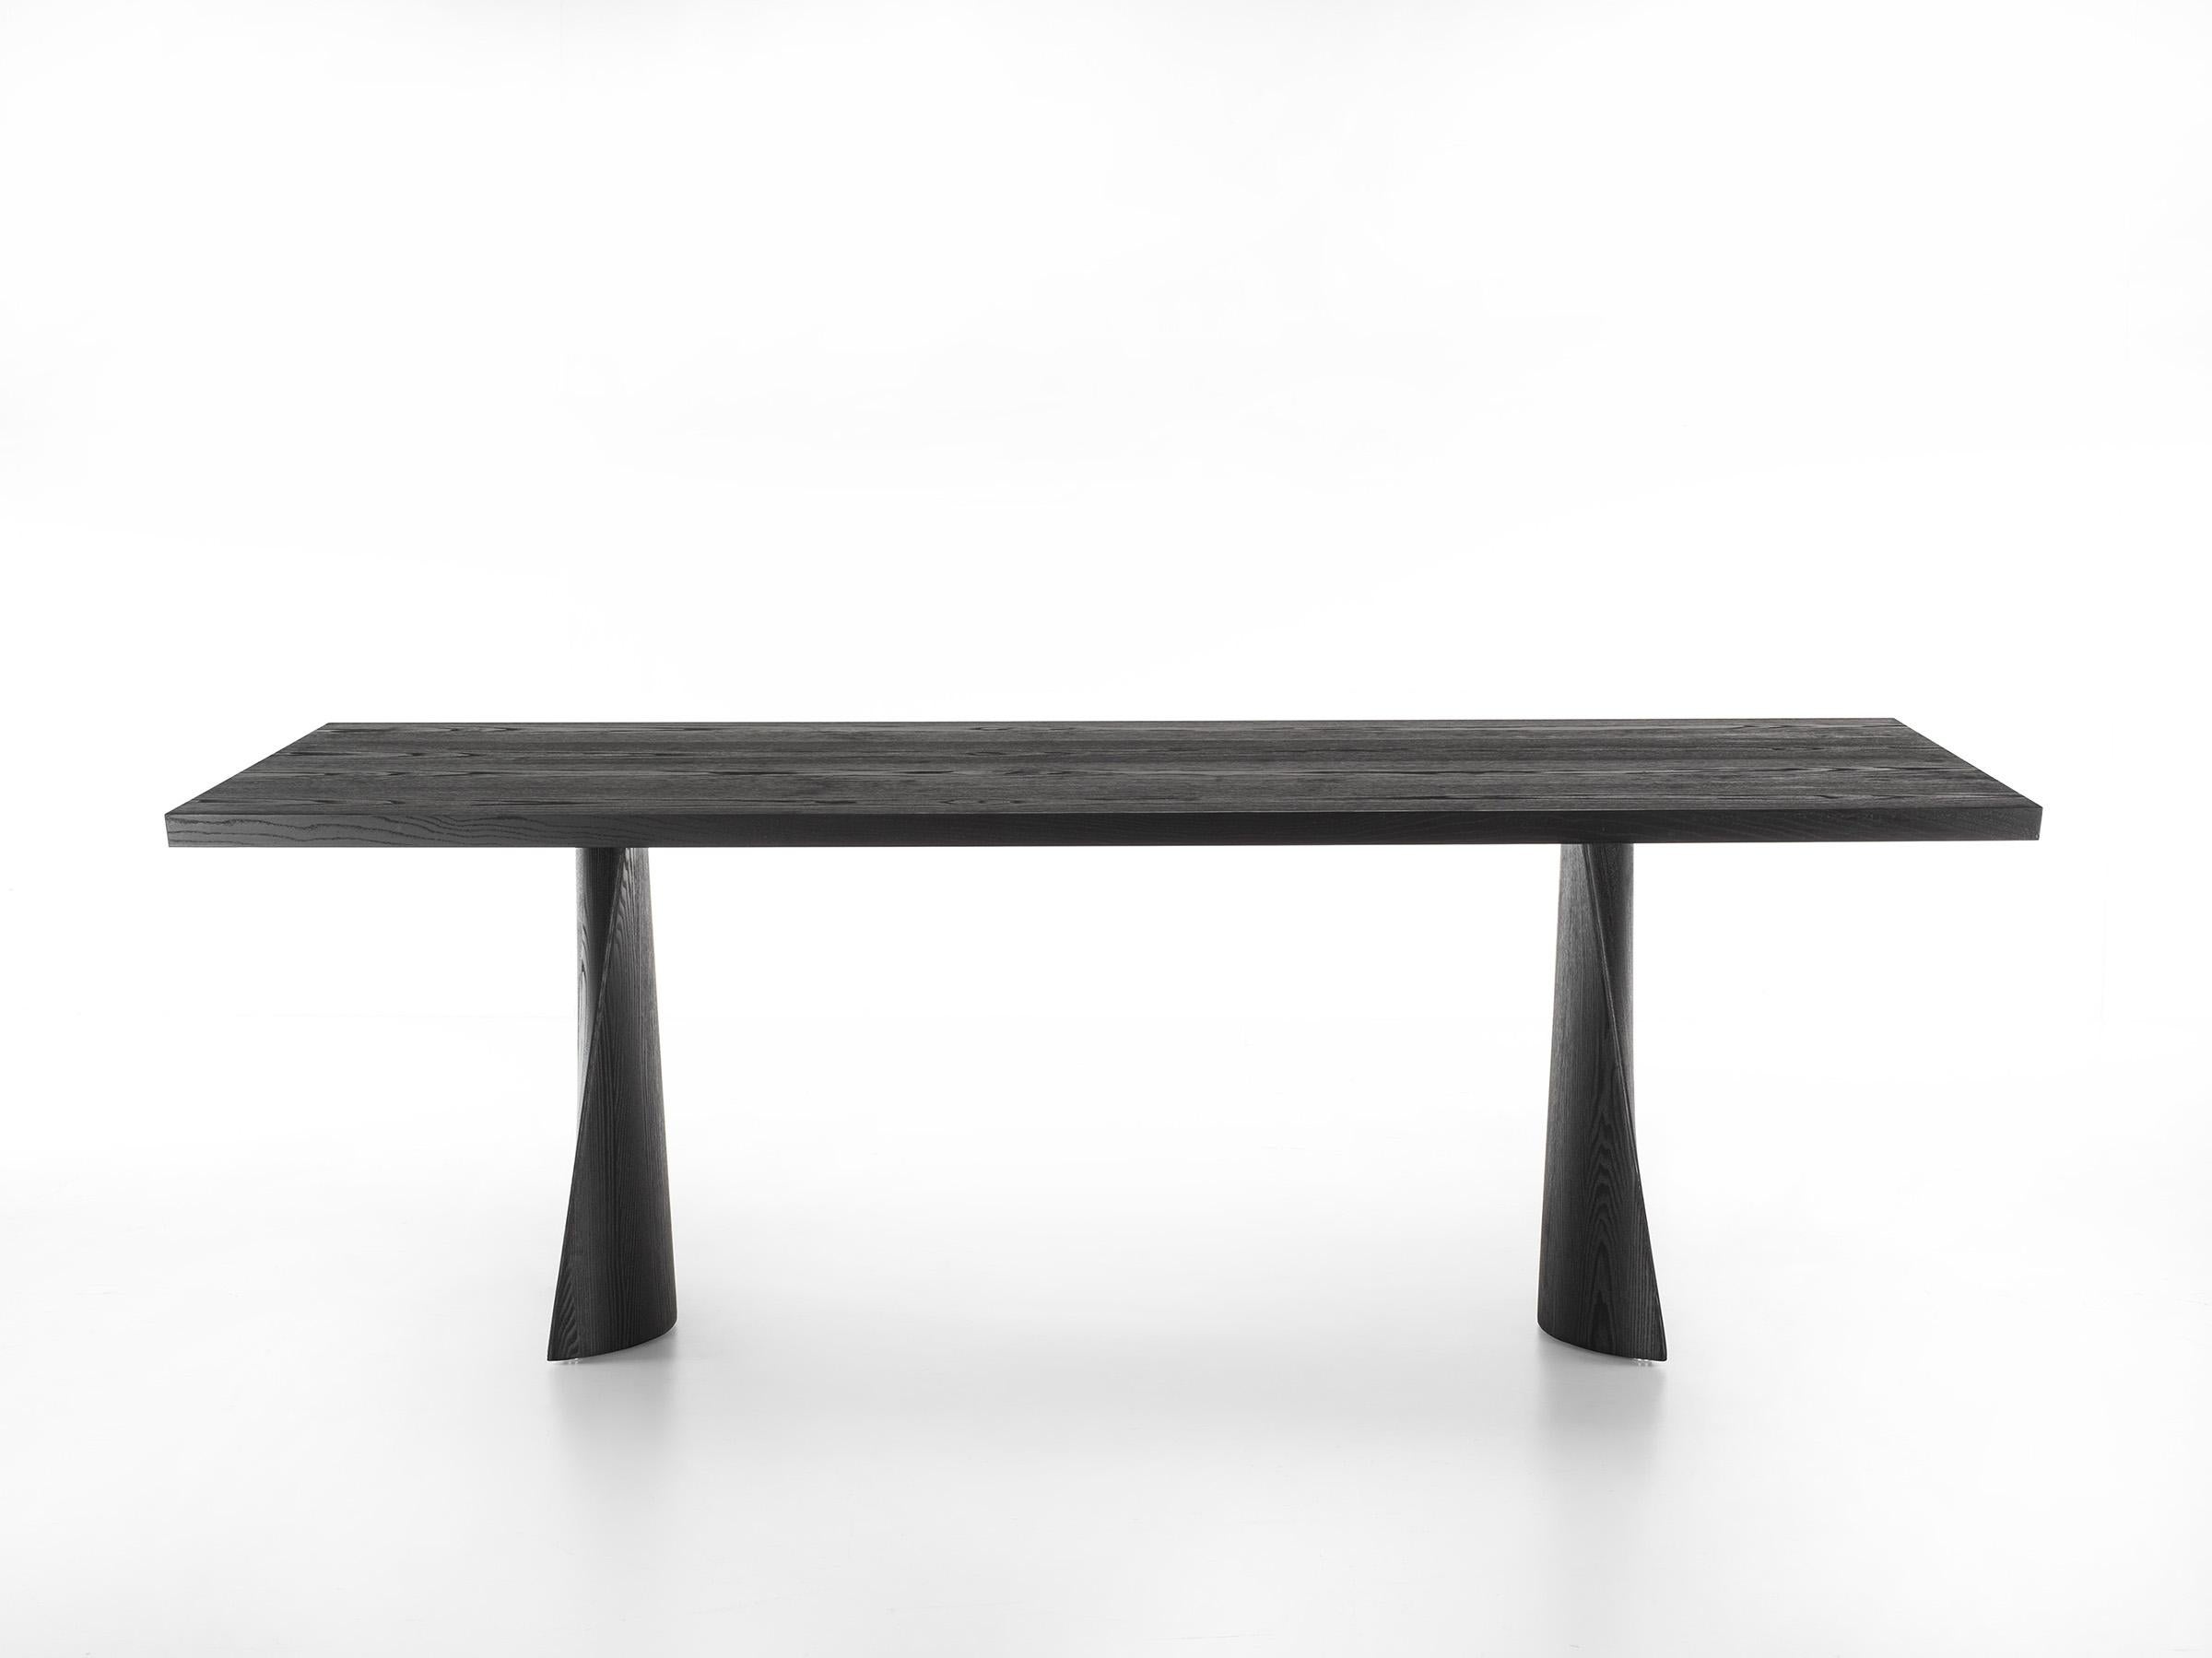 Contemporary Simple Swing Wood Table, Designed by Studio Excalibur, Made in Italy For Sale